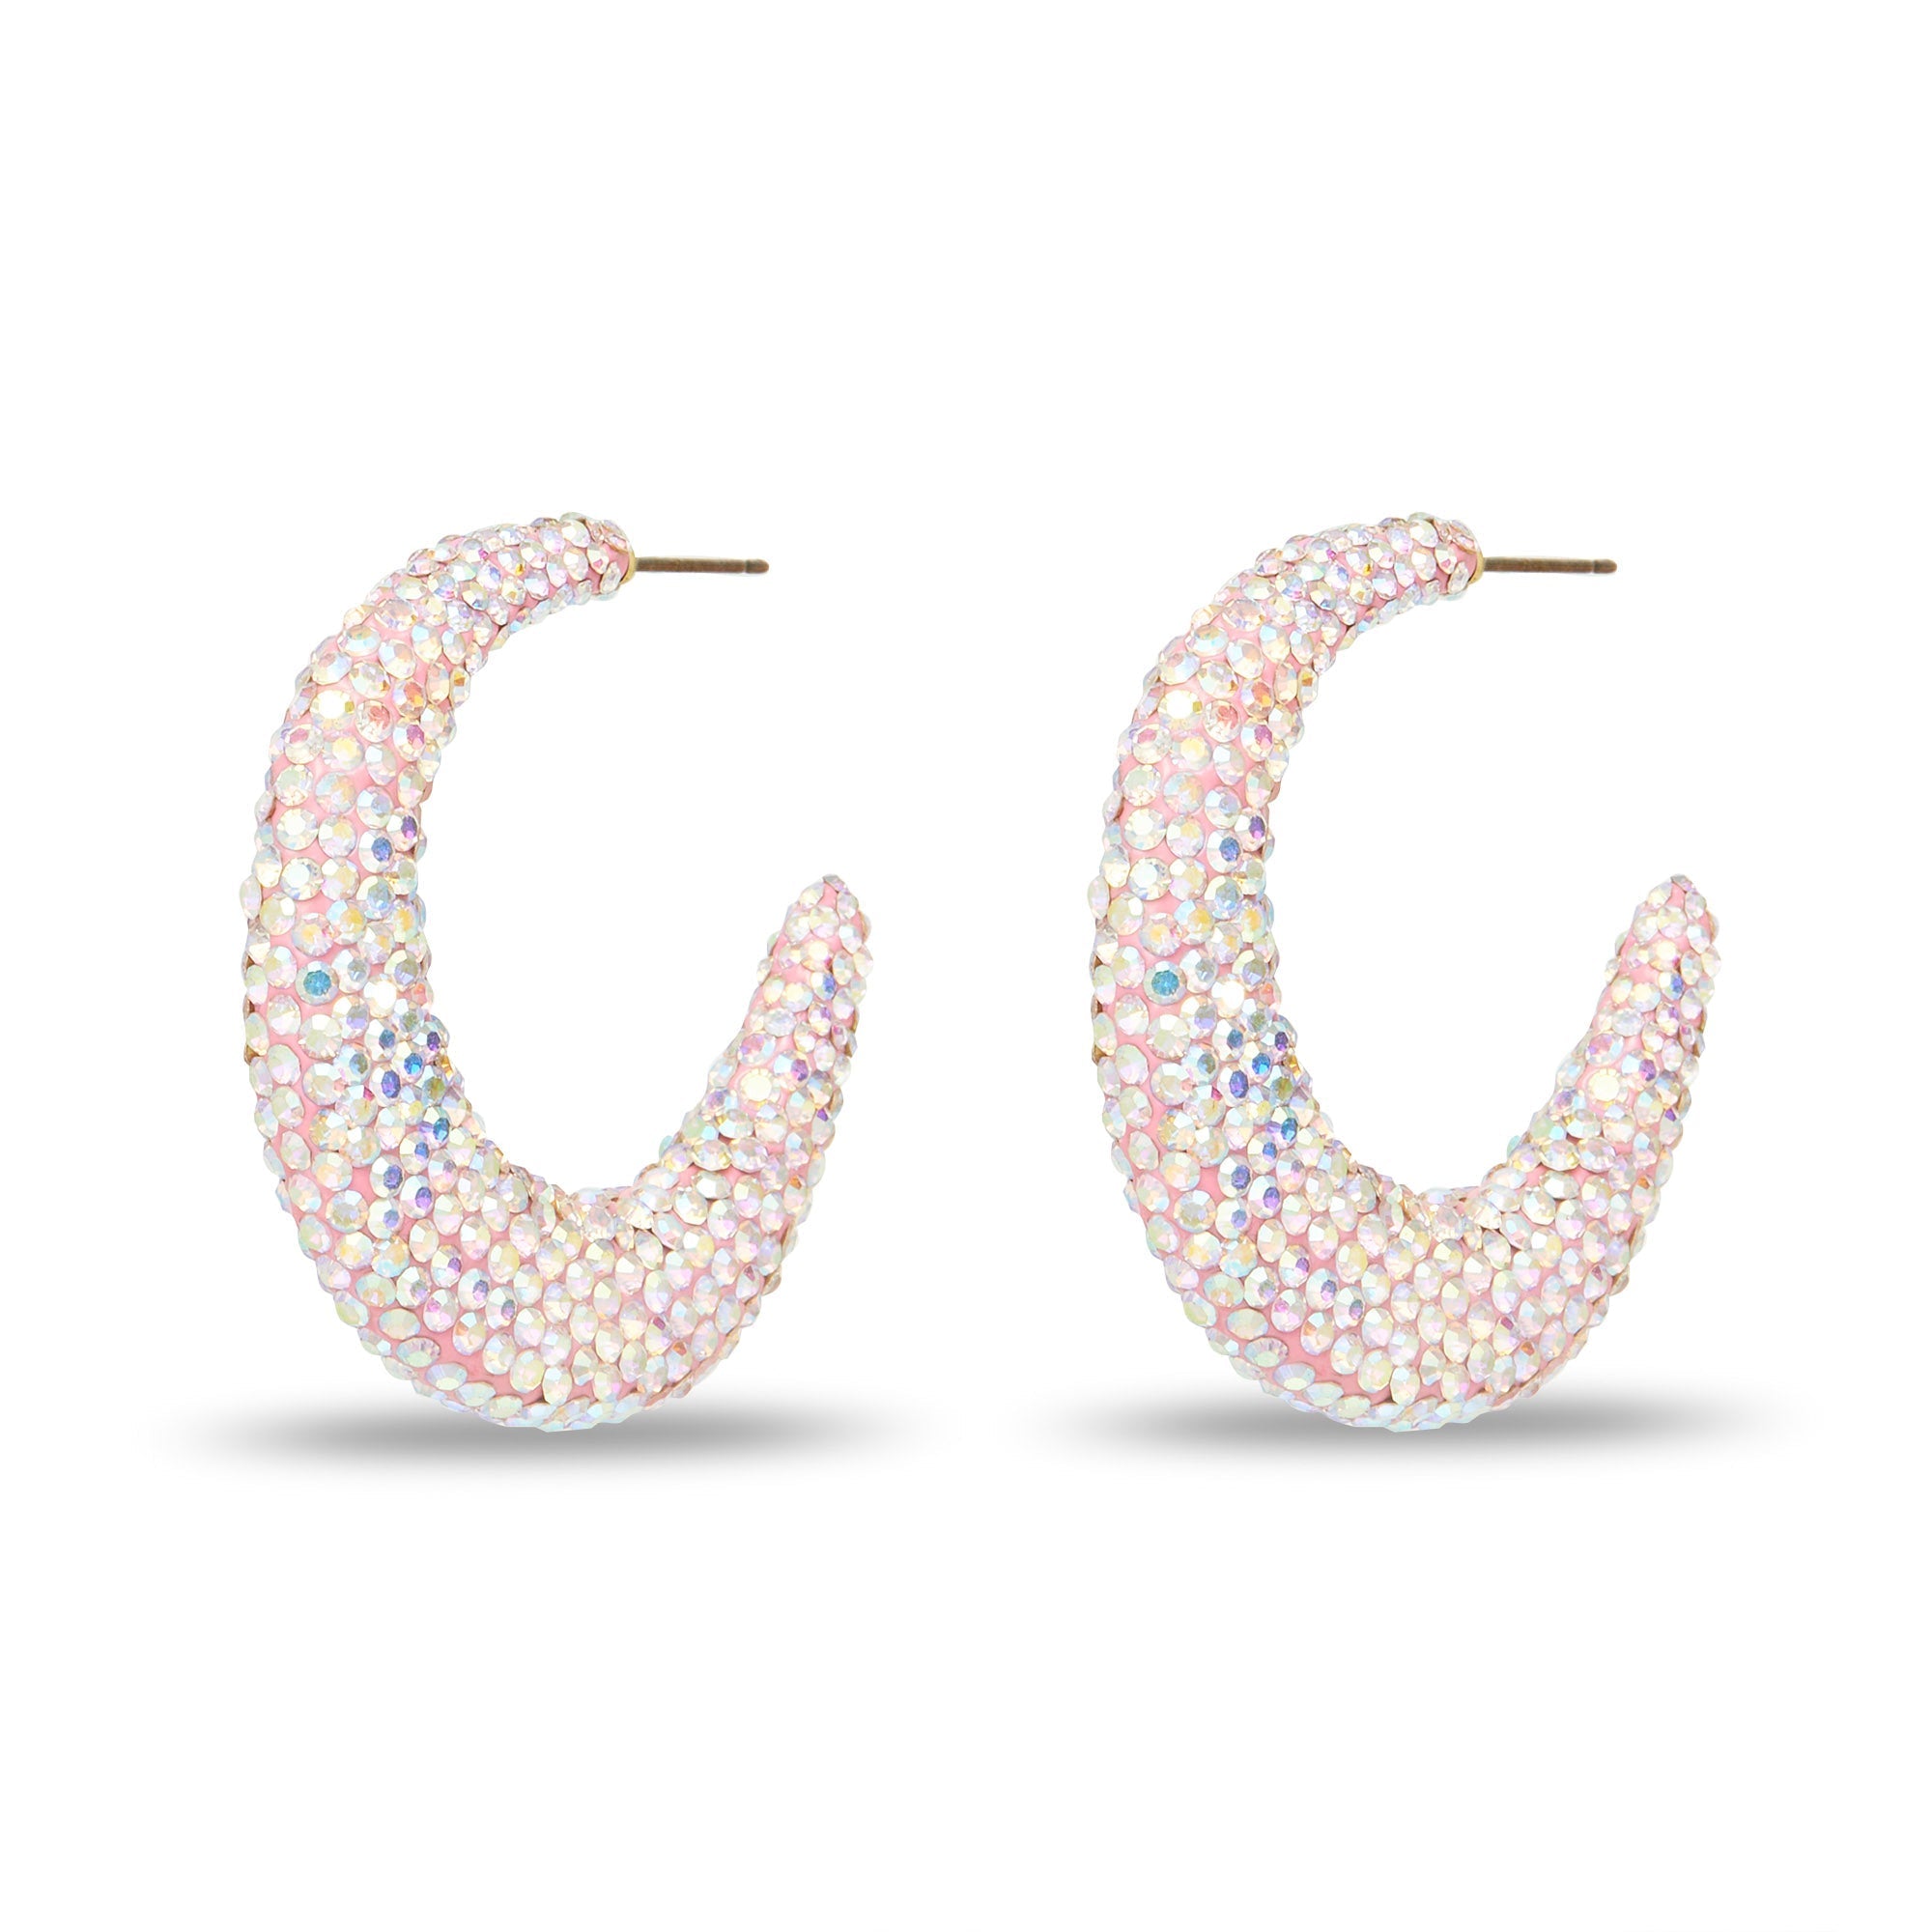 Lele Sadoughi EARRINGS ONE SIZE HOLOGRAPHIC CRYSTAL ARCHER PAVE HOOP EARRINGS